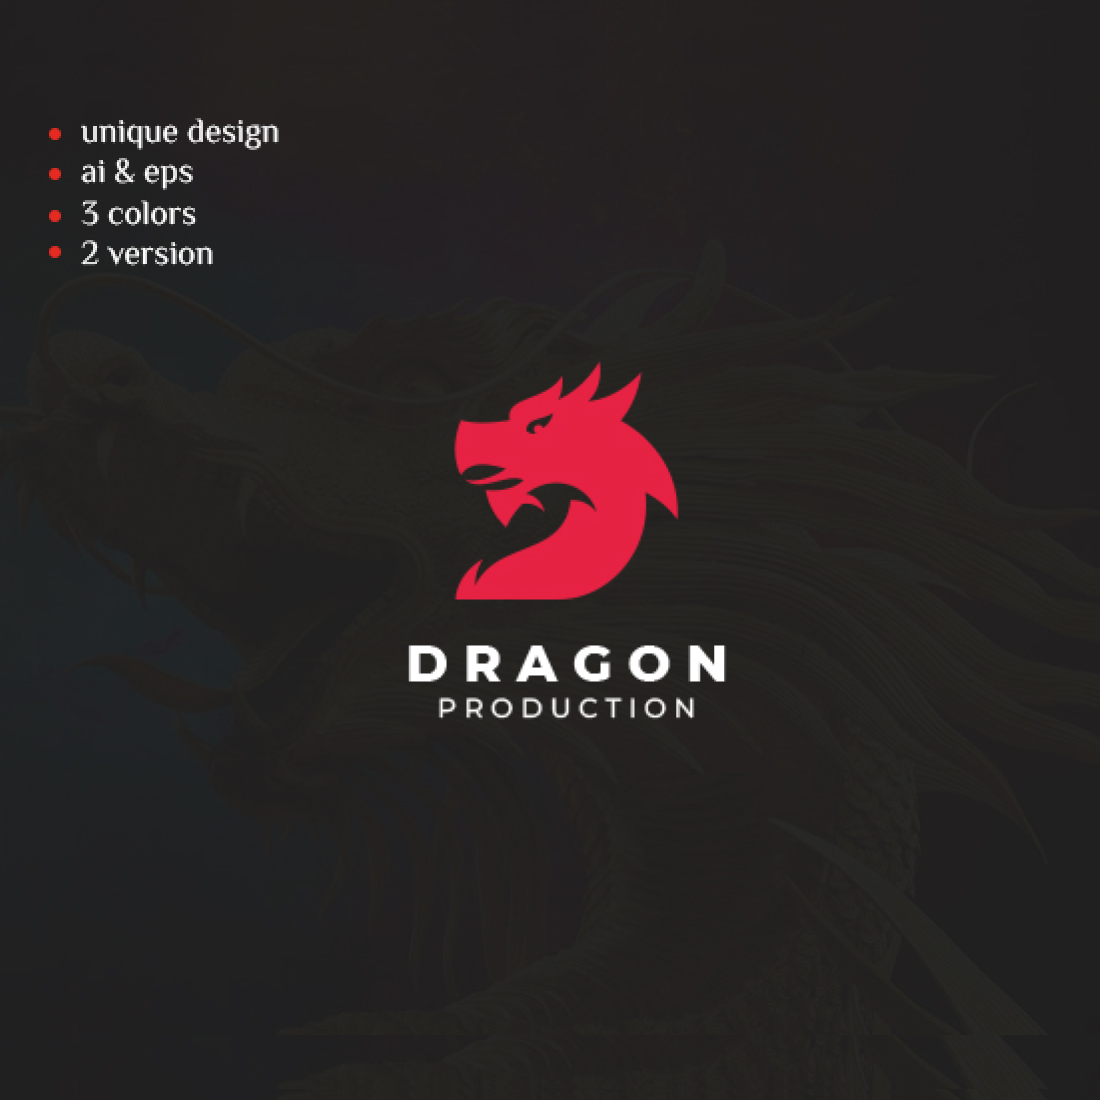 Red dragon logo on a black background.